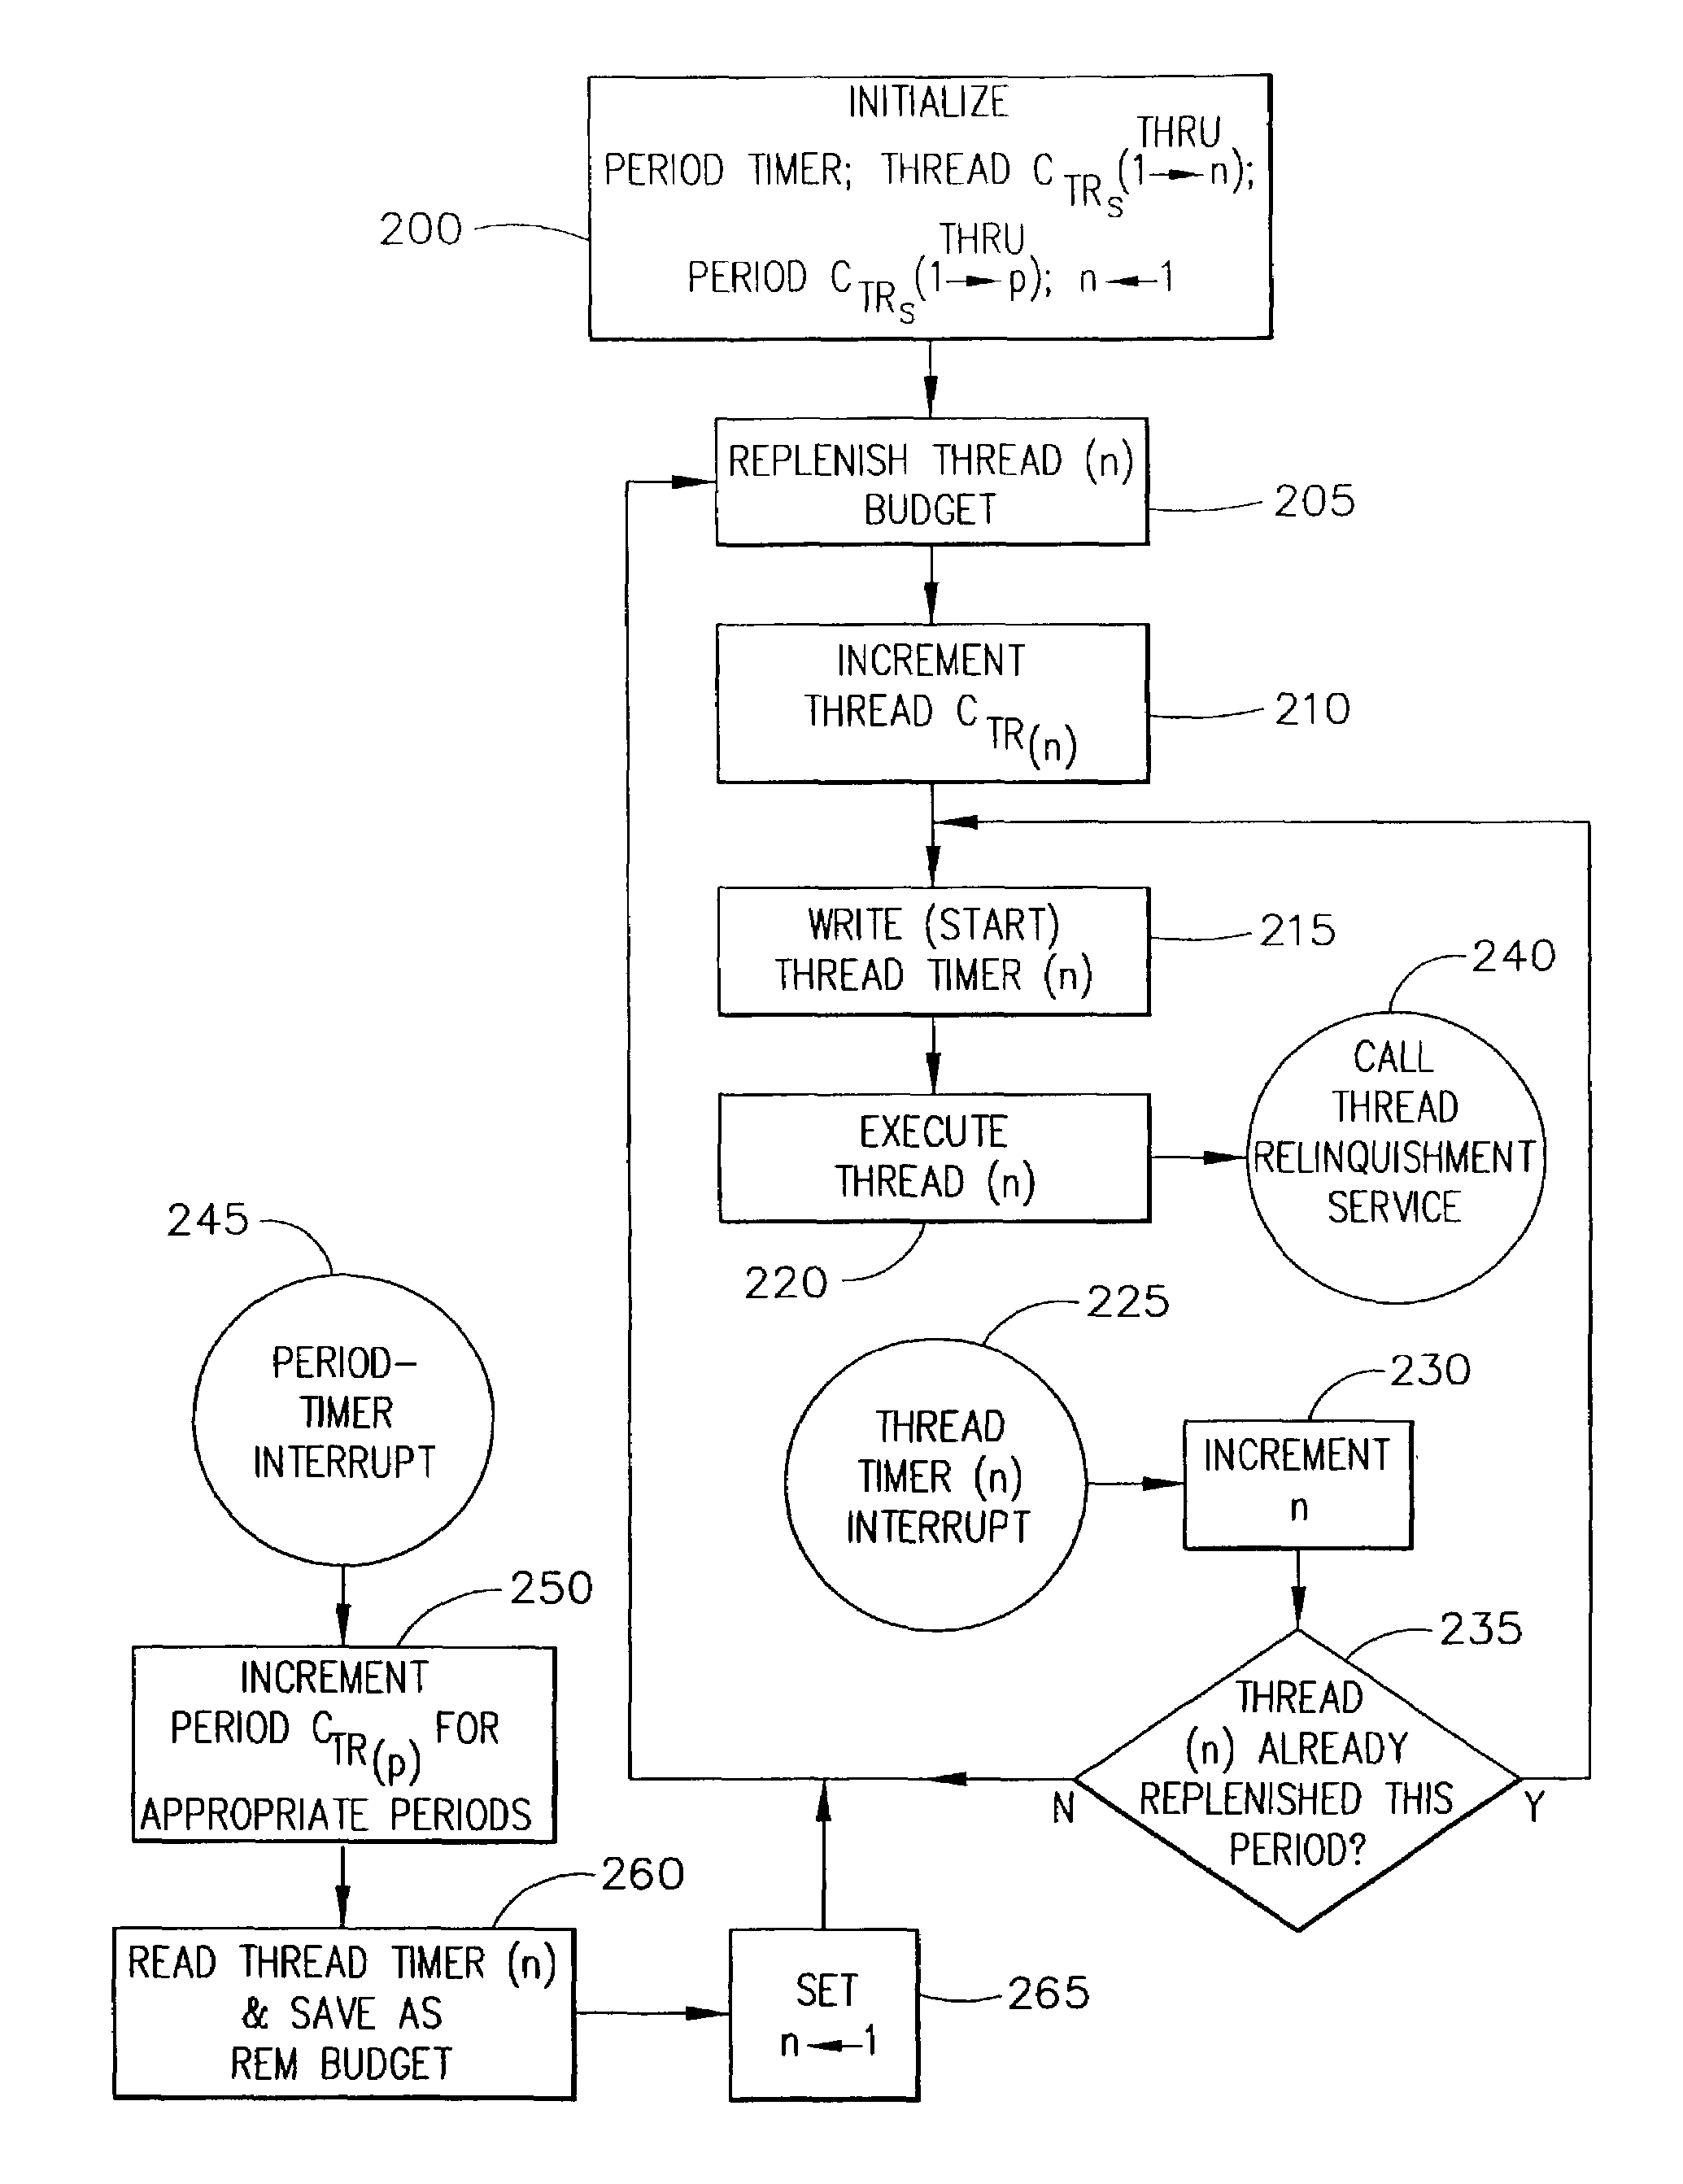 System and method for robust time partitioning of tasks in a real-time computing environment